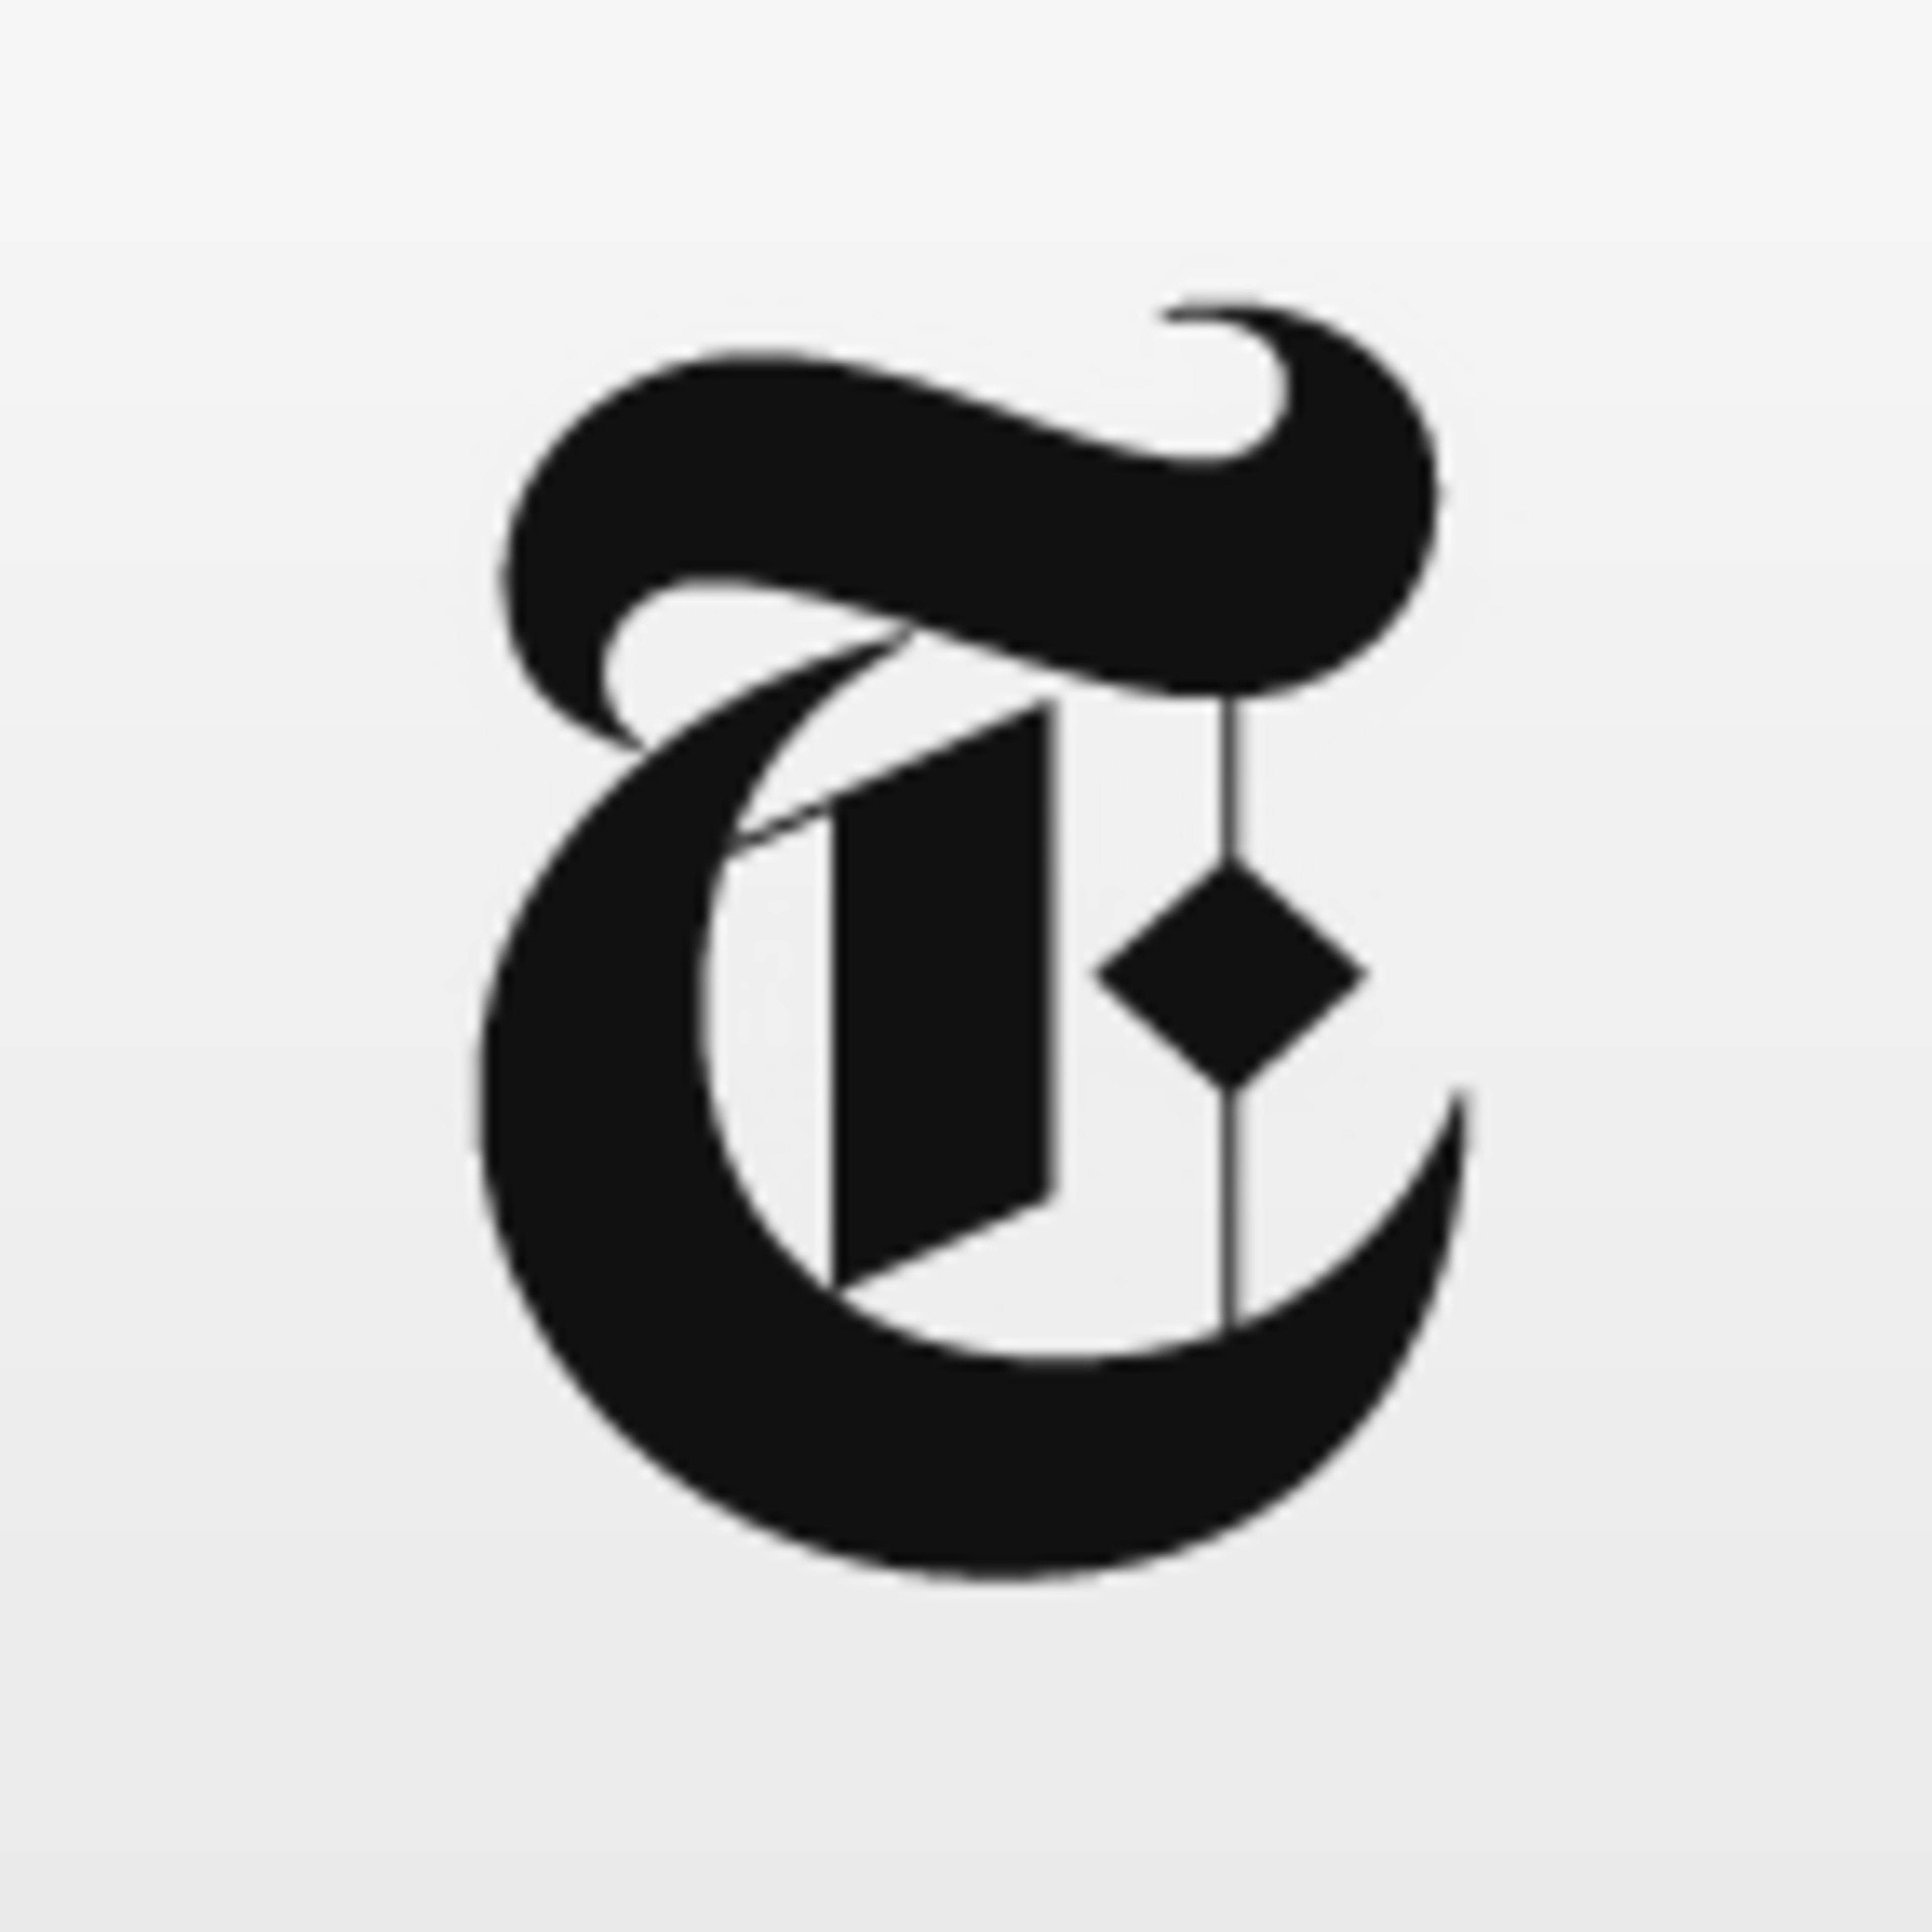 The New York Times Digital Subscription Code